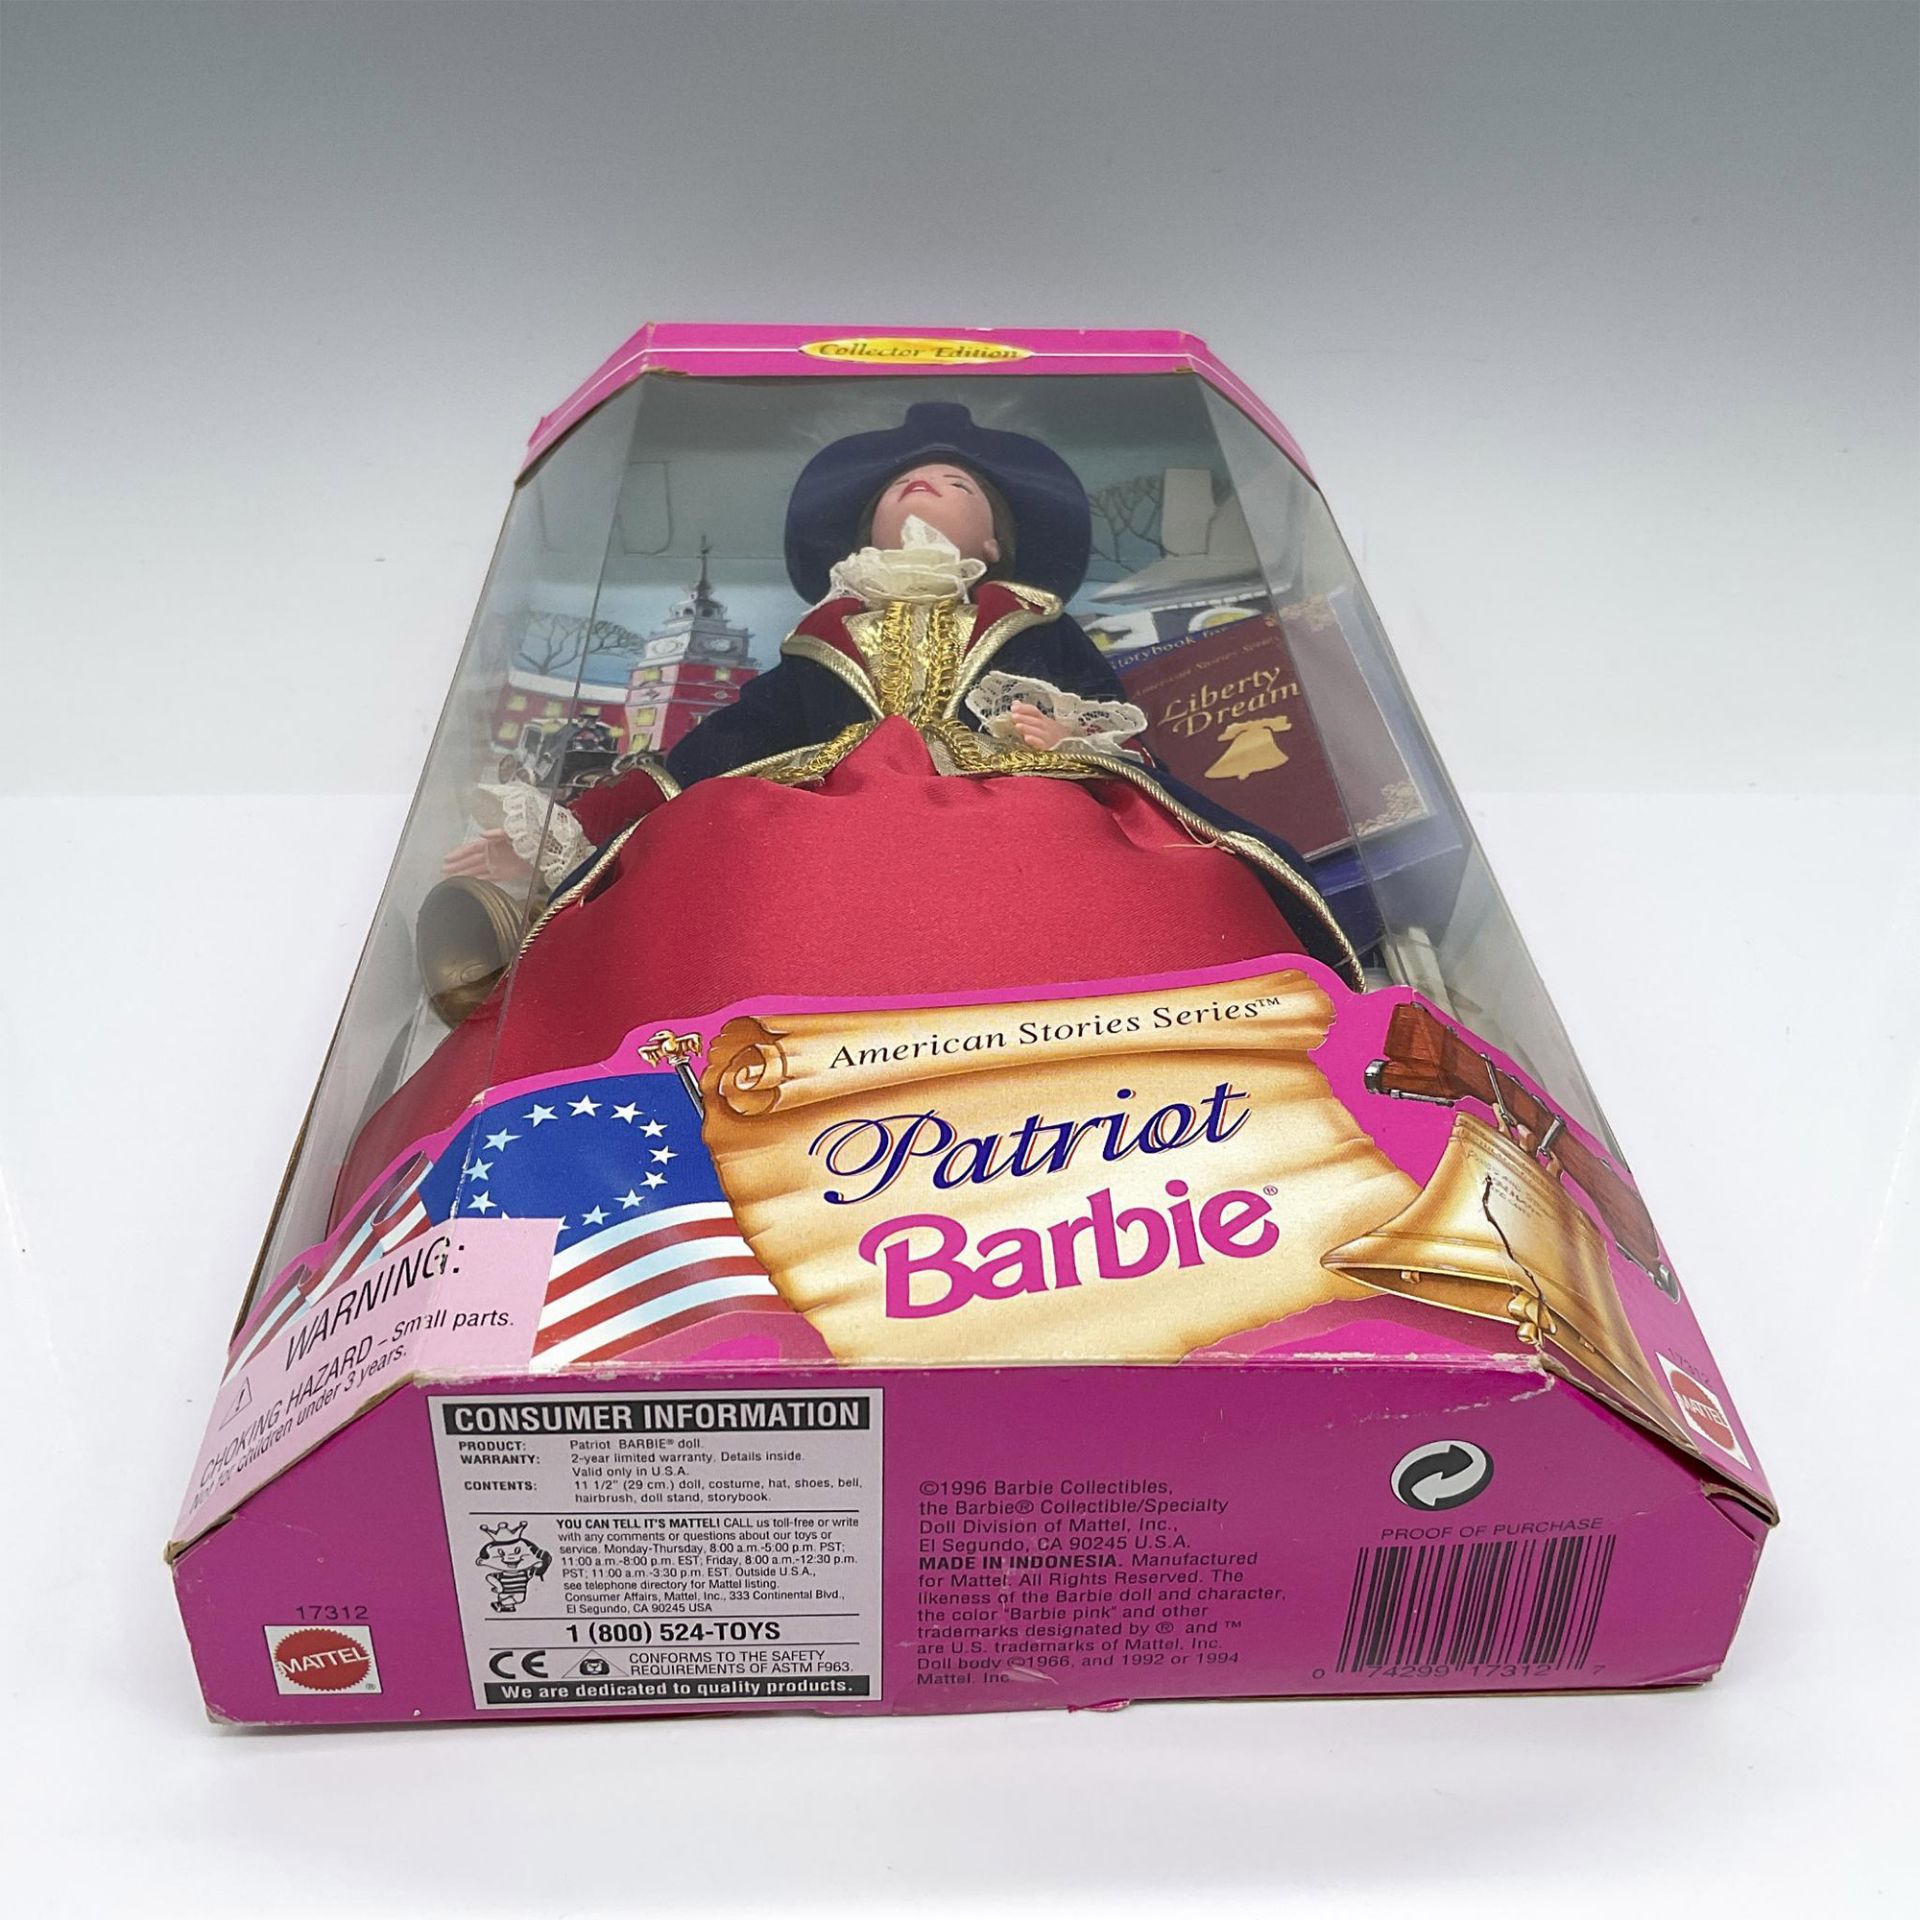 Mattel Patriot Barbie Doll Collector Edition, New in Box - Image 3 of 3